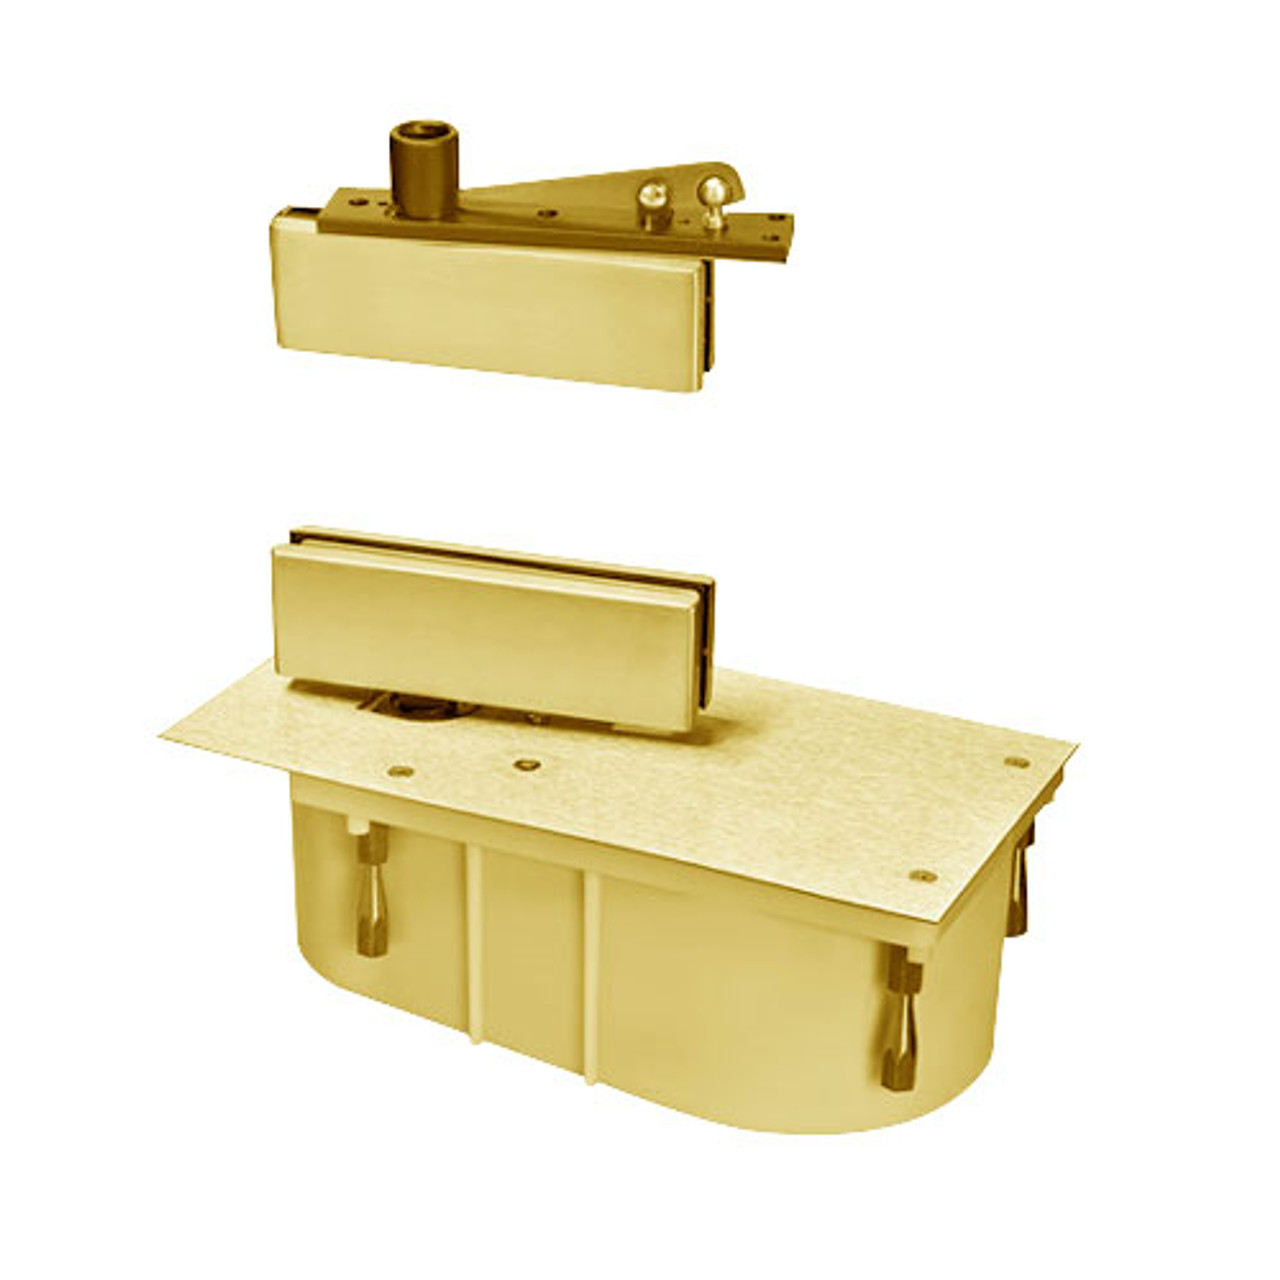 428-90S-LTP-LH-605 Rixson 428 Series Heavy Duty Single Acting Center Hung Floor Closer with Patch Fittings in Bright Brass Finish